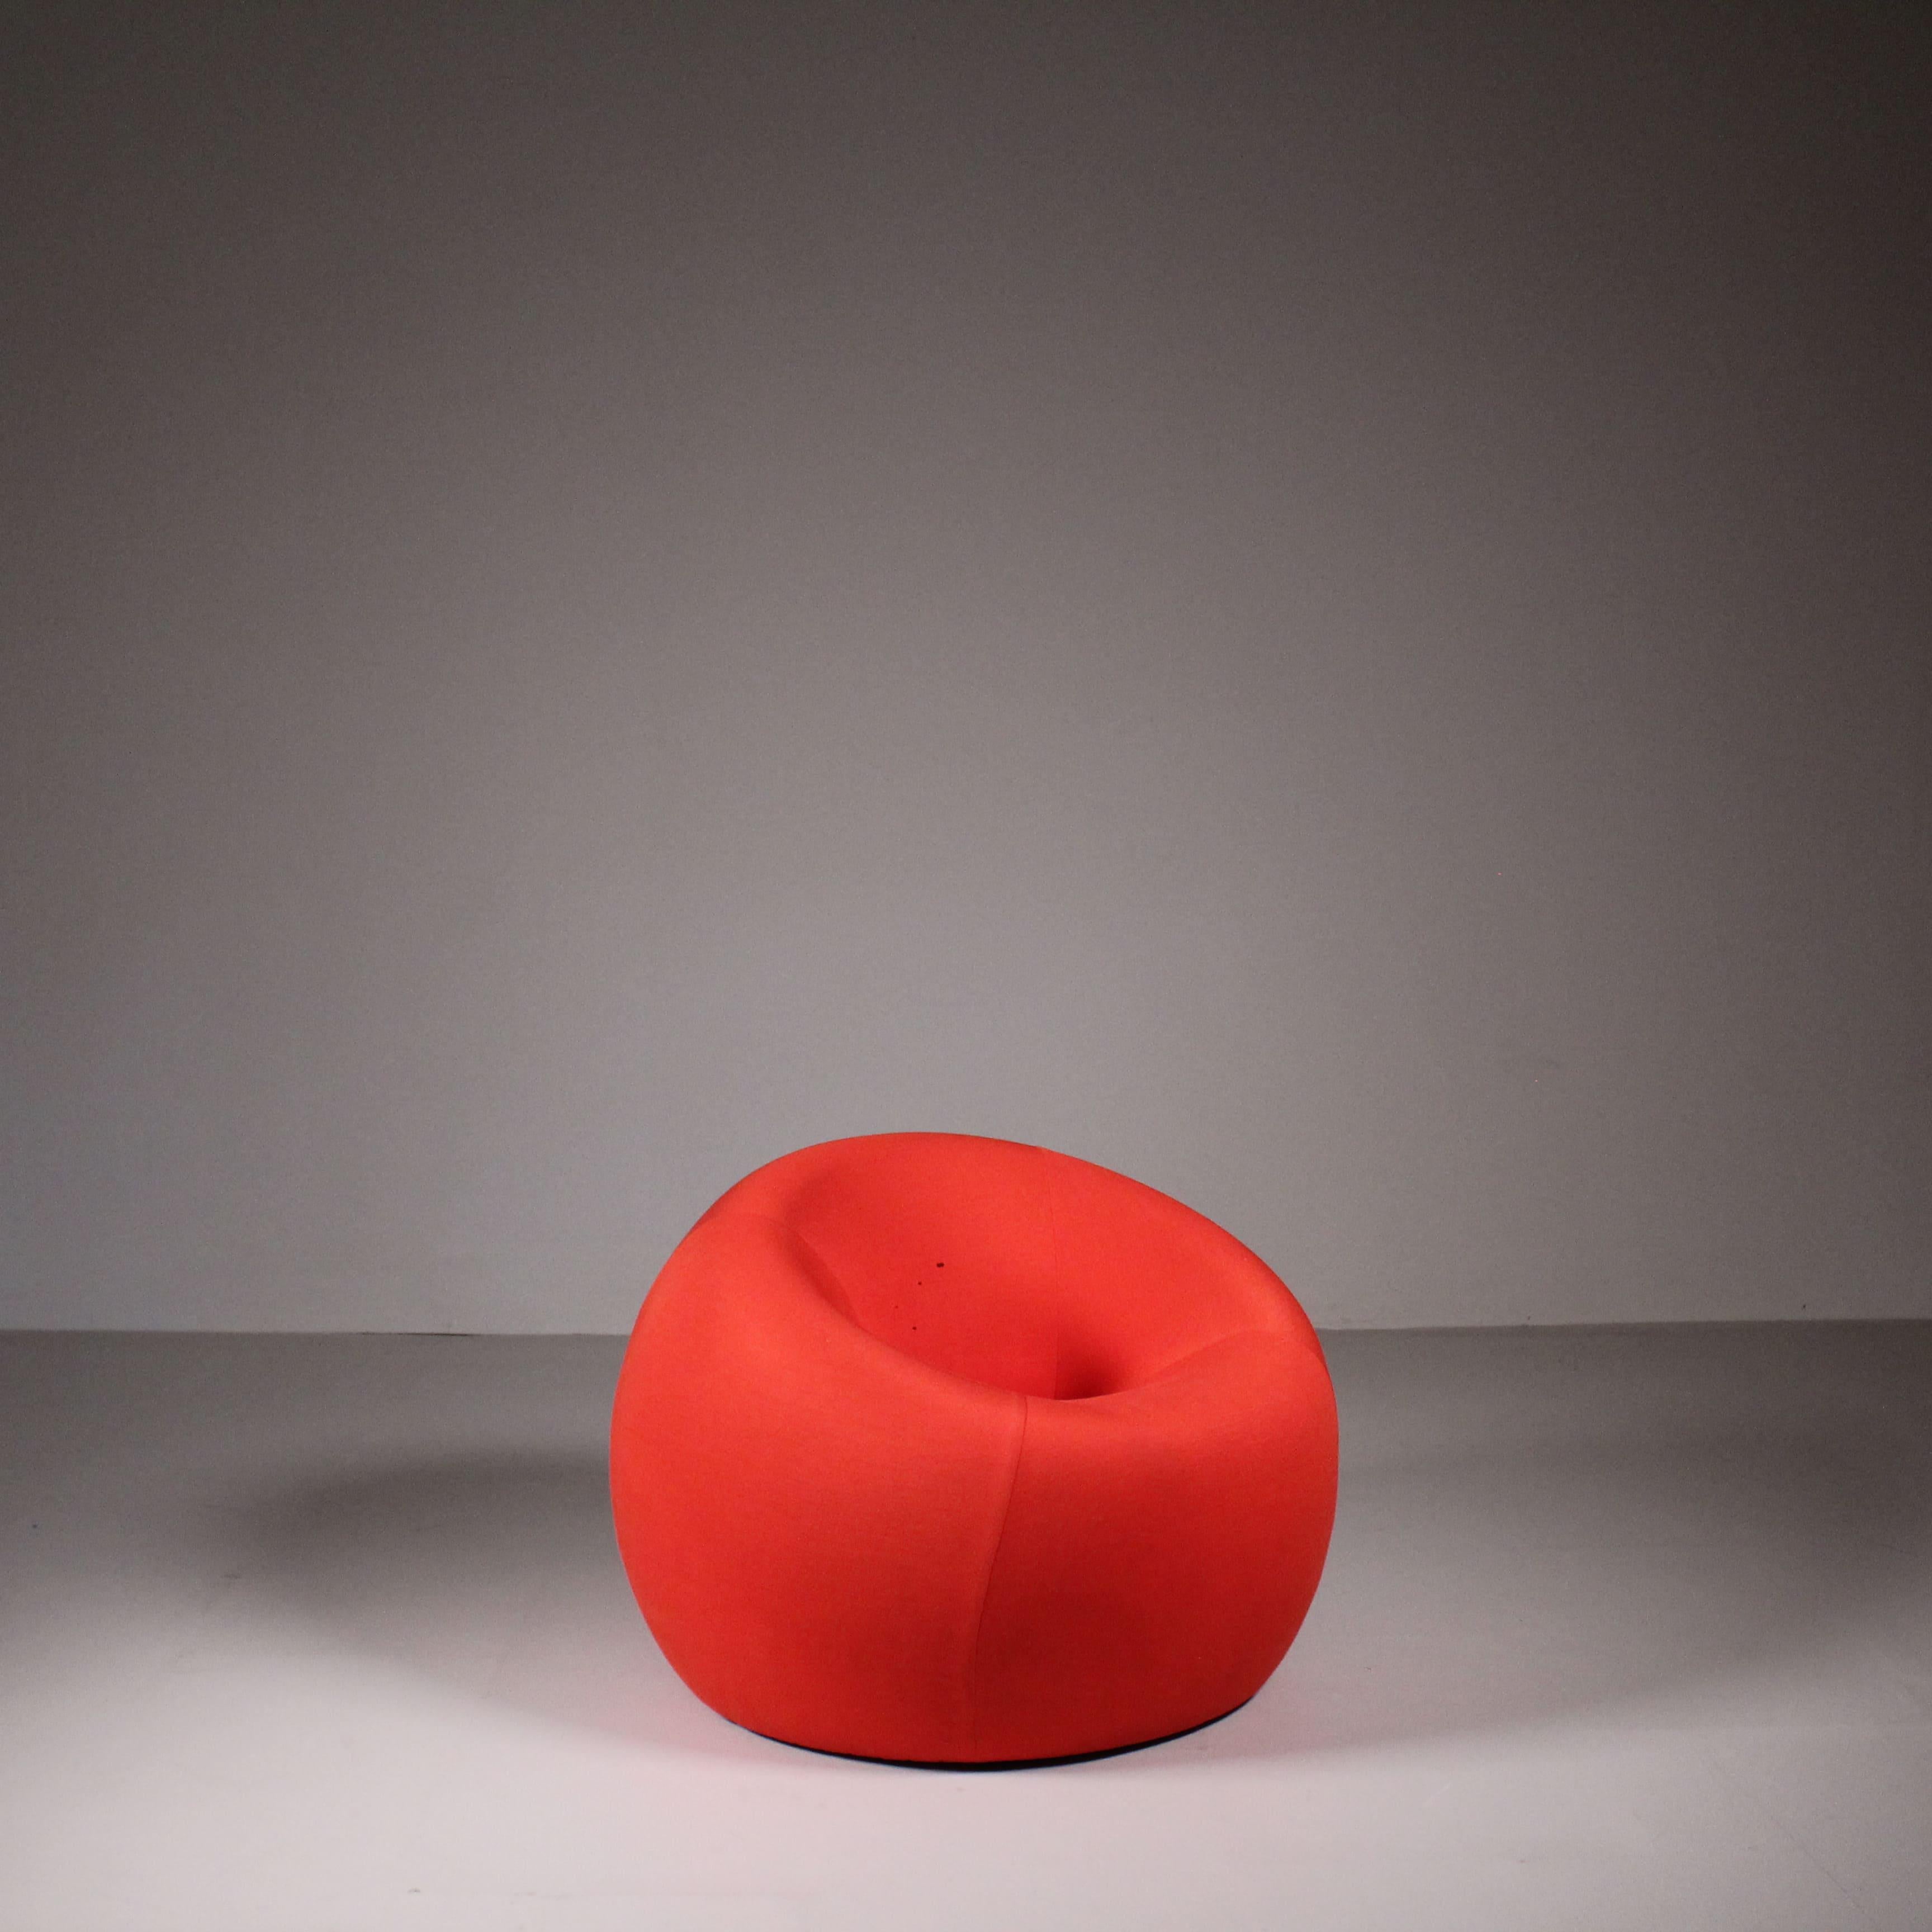 The UP1 Armchair, designed by Gaetano Pesce in 1969 for B&B Italia, represents one of the most significant design icons of the 20th century. This armchair is part of the celebrated UP Series, which revolutionized the concept of seating with its